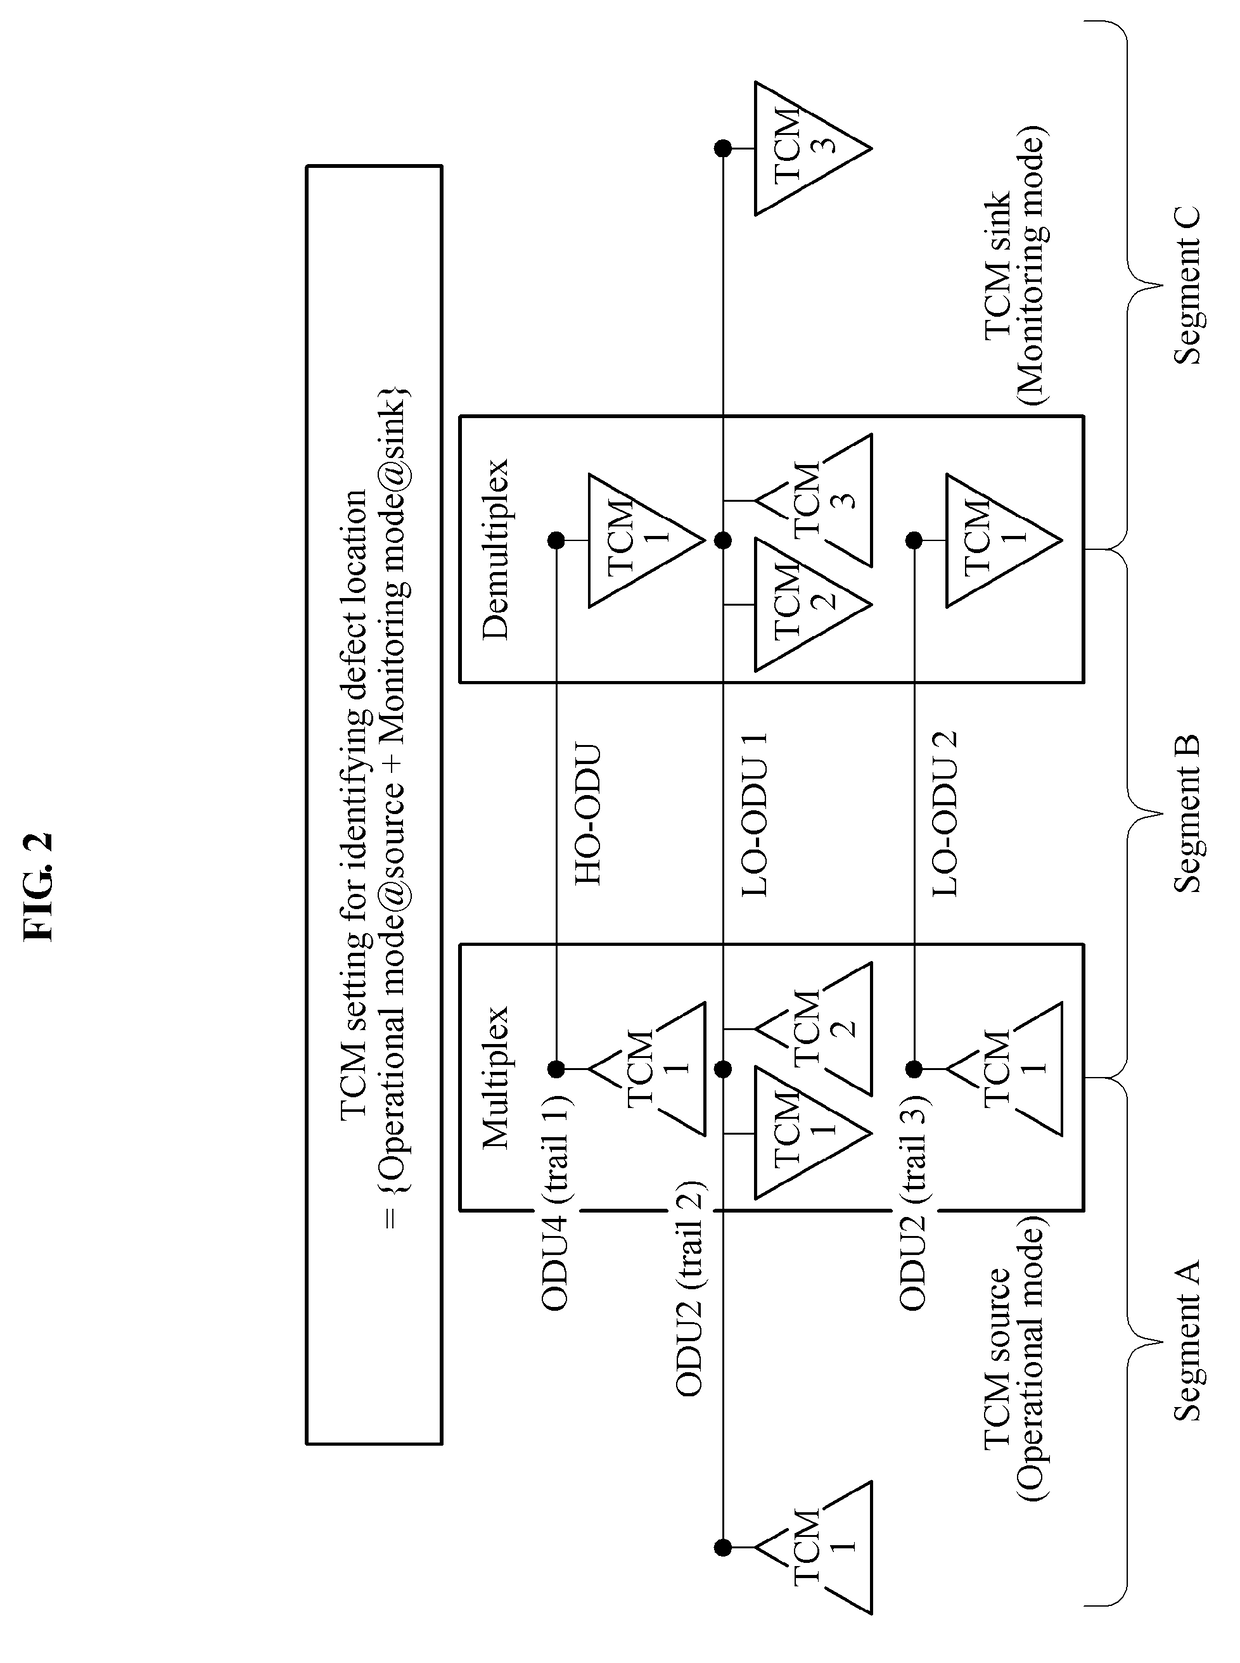 Apparatus and method for localizing defect location and apparatus and method for identifying cause of defect in optical transport network (OTN) based on tandem connection monitoring (TCM) coordinates and defect traceback